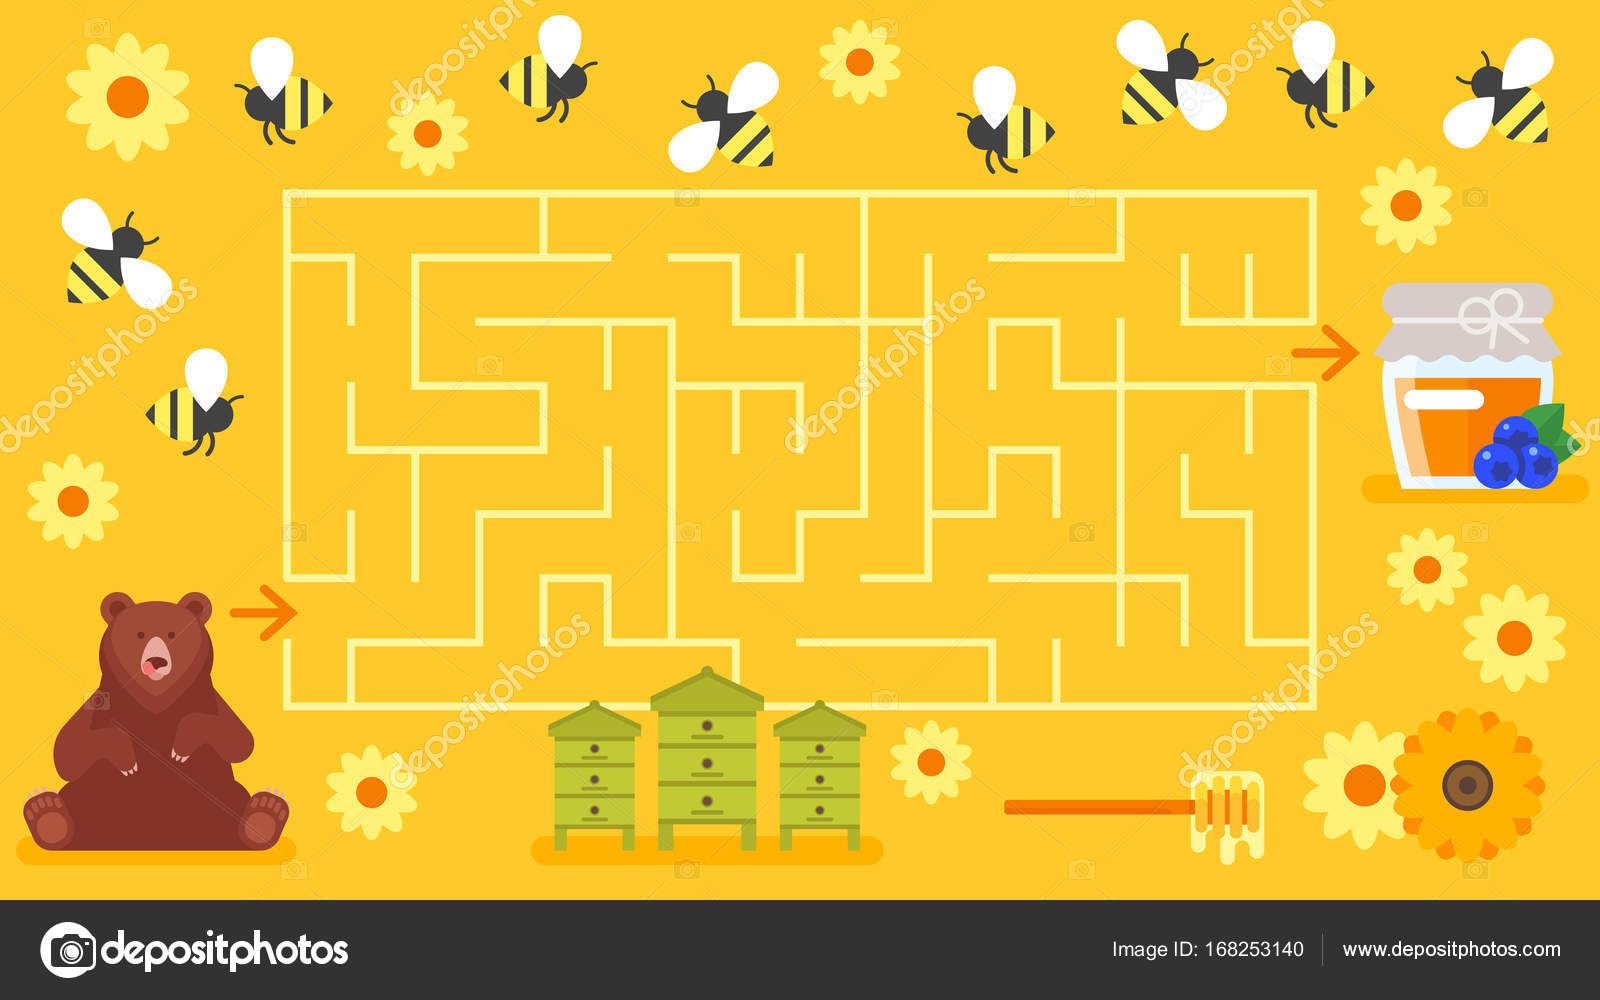 Labyrinth maze make a cocktail drink board game Vector Image